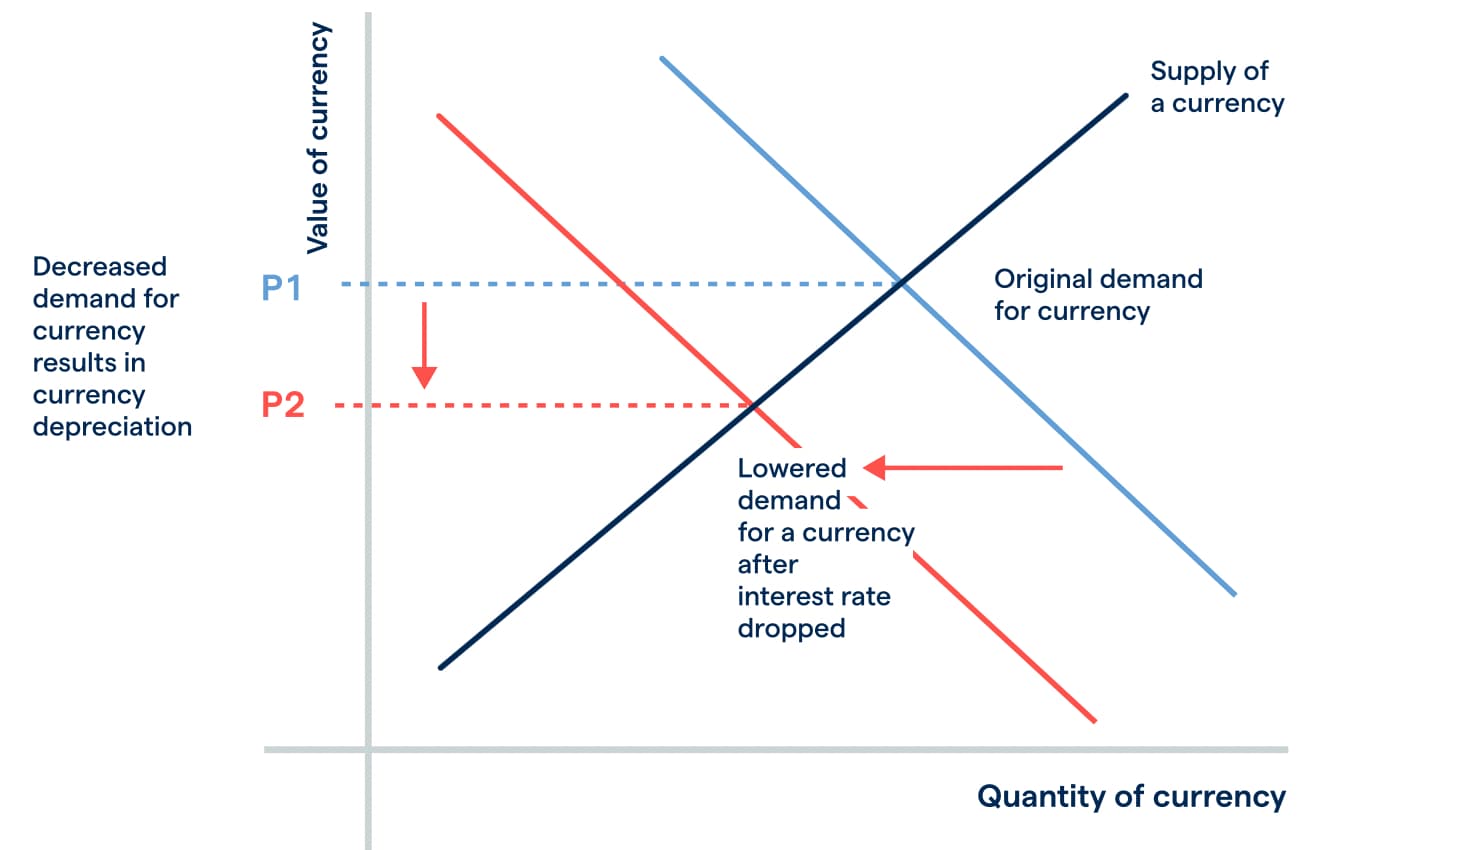 Decreased demand for currency results in currency depreciations